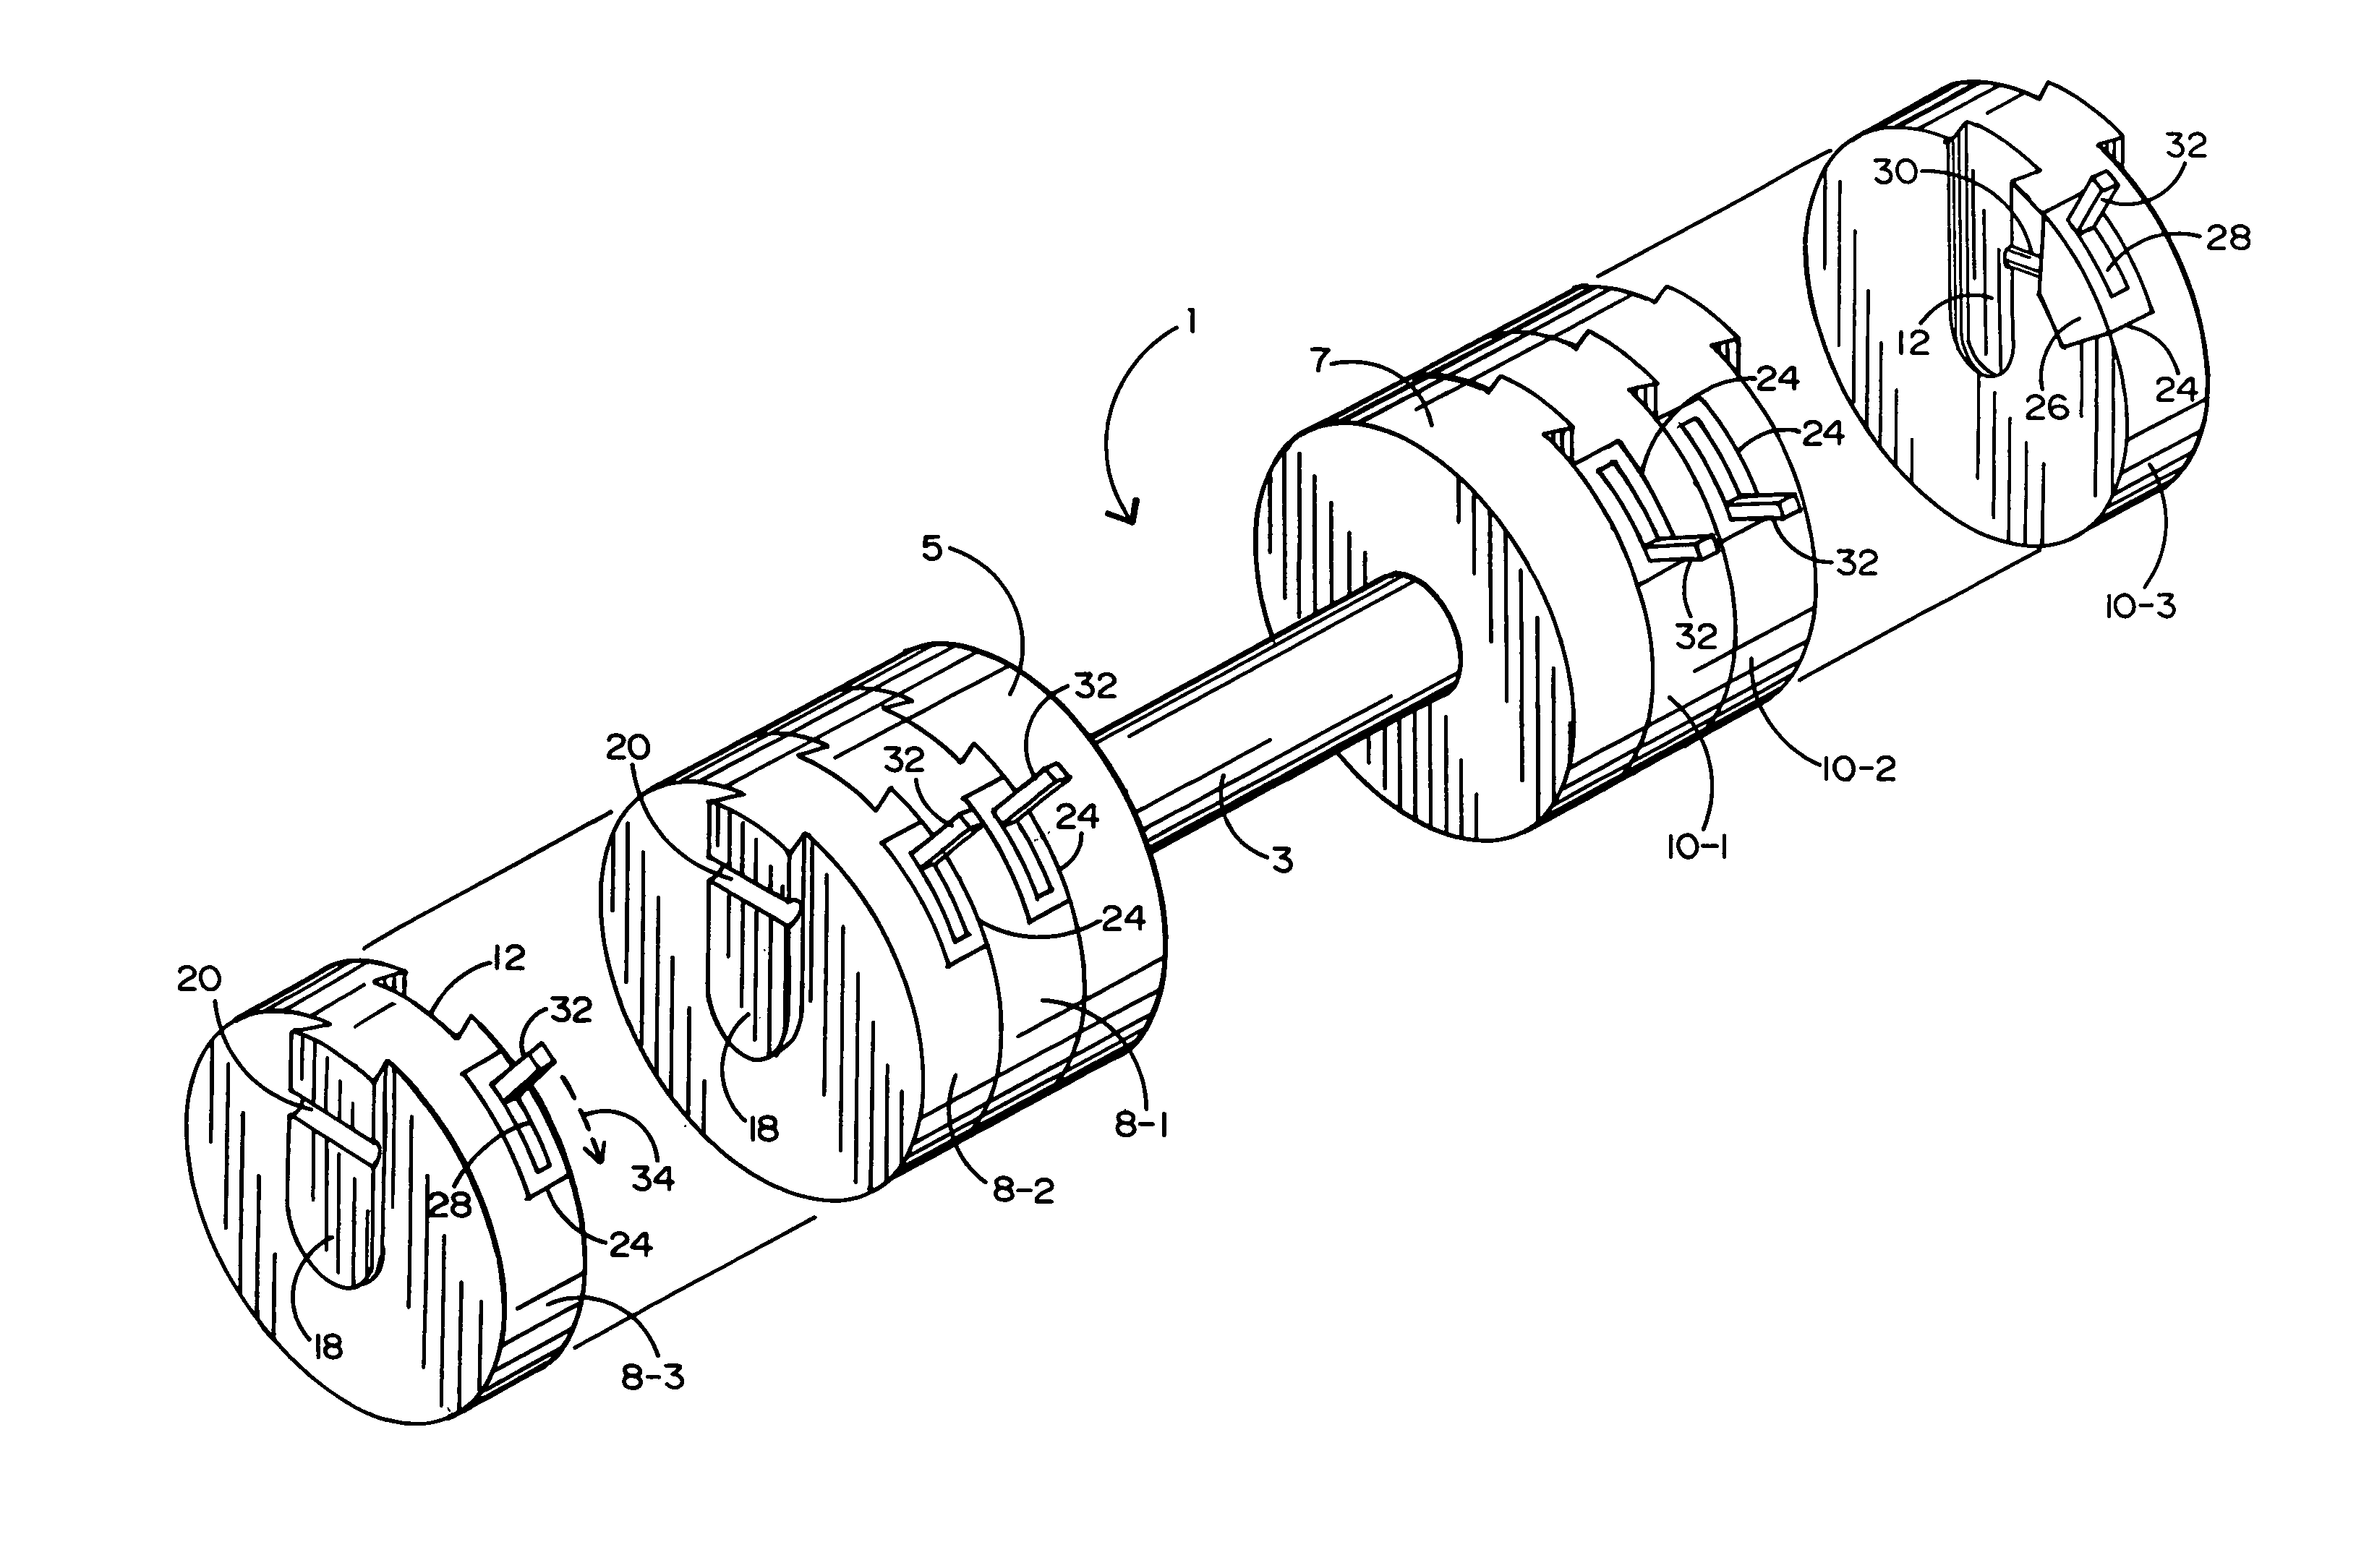 Dumbbell weight training device having detachable weight plates